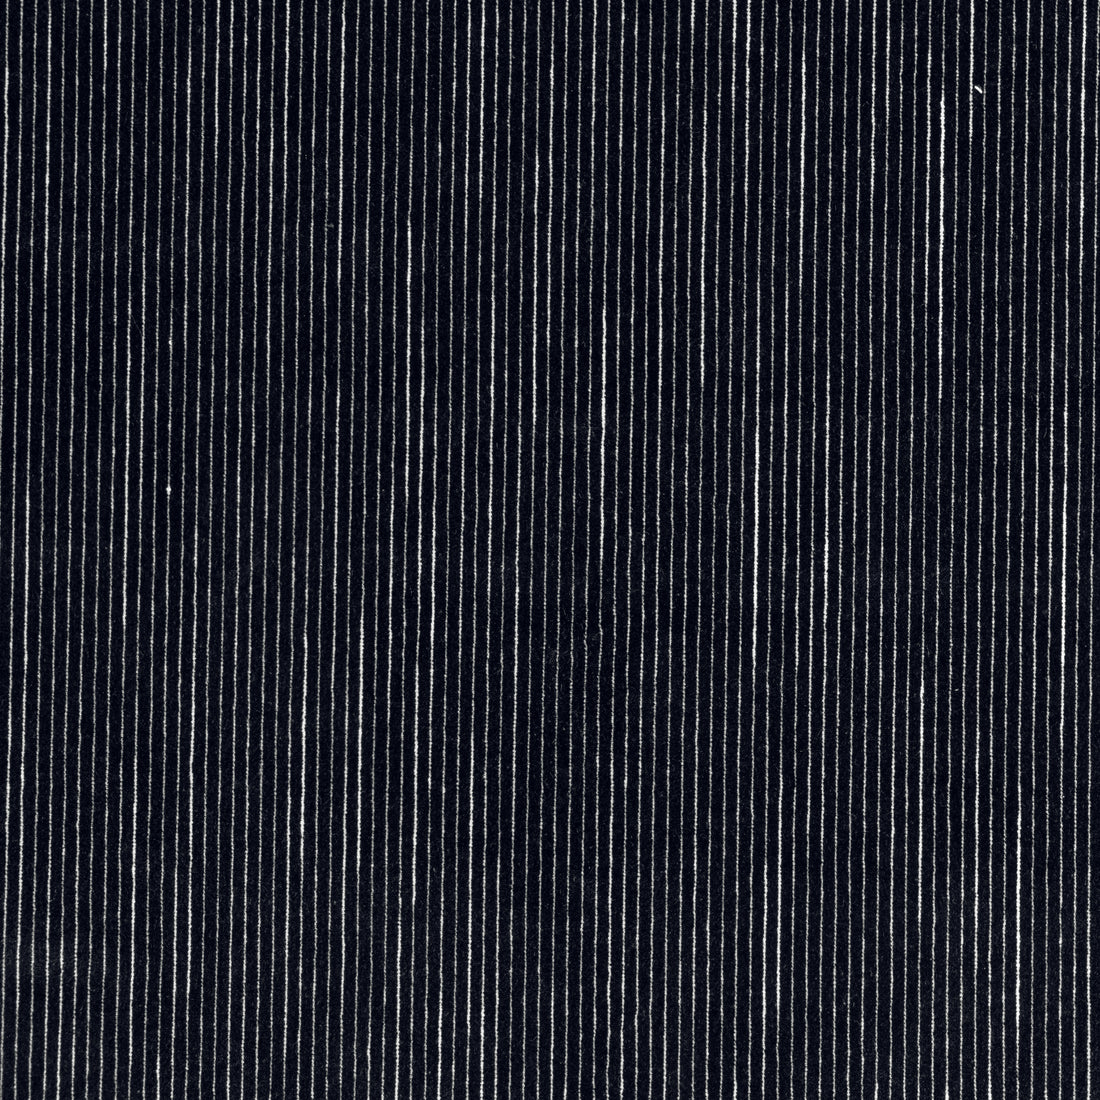 Fino Velvet fabric in charcoal color - pattern number W8151 - by Thibaut in the Sereno collection